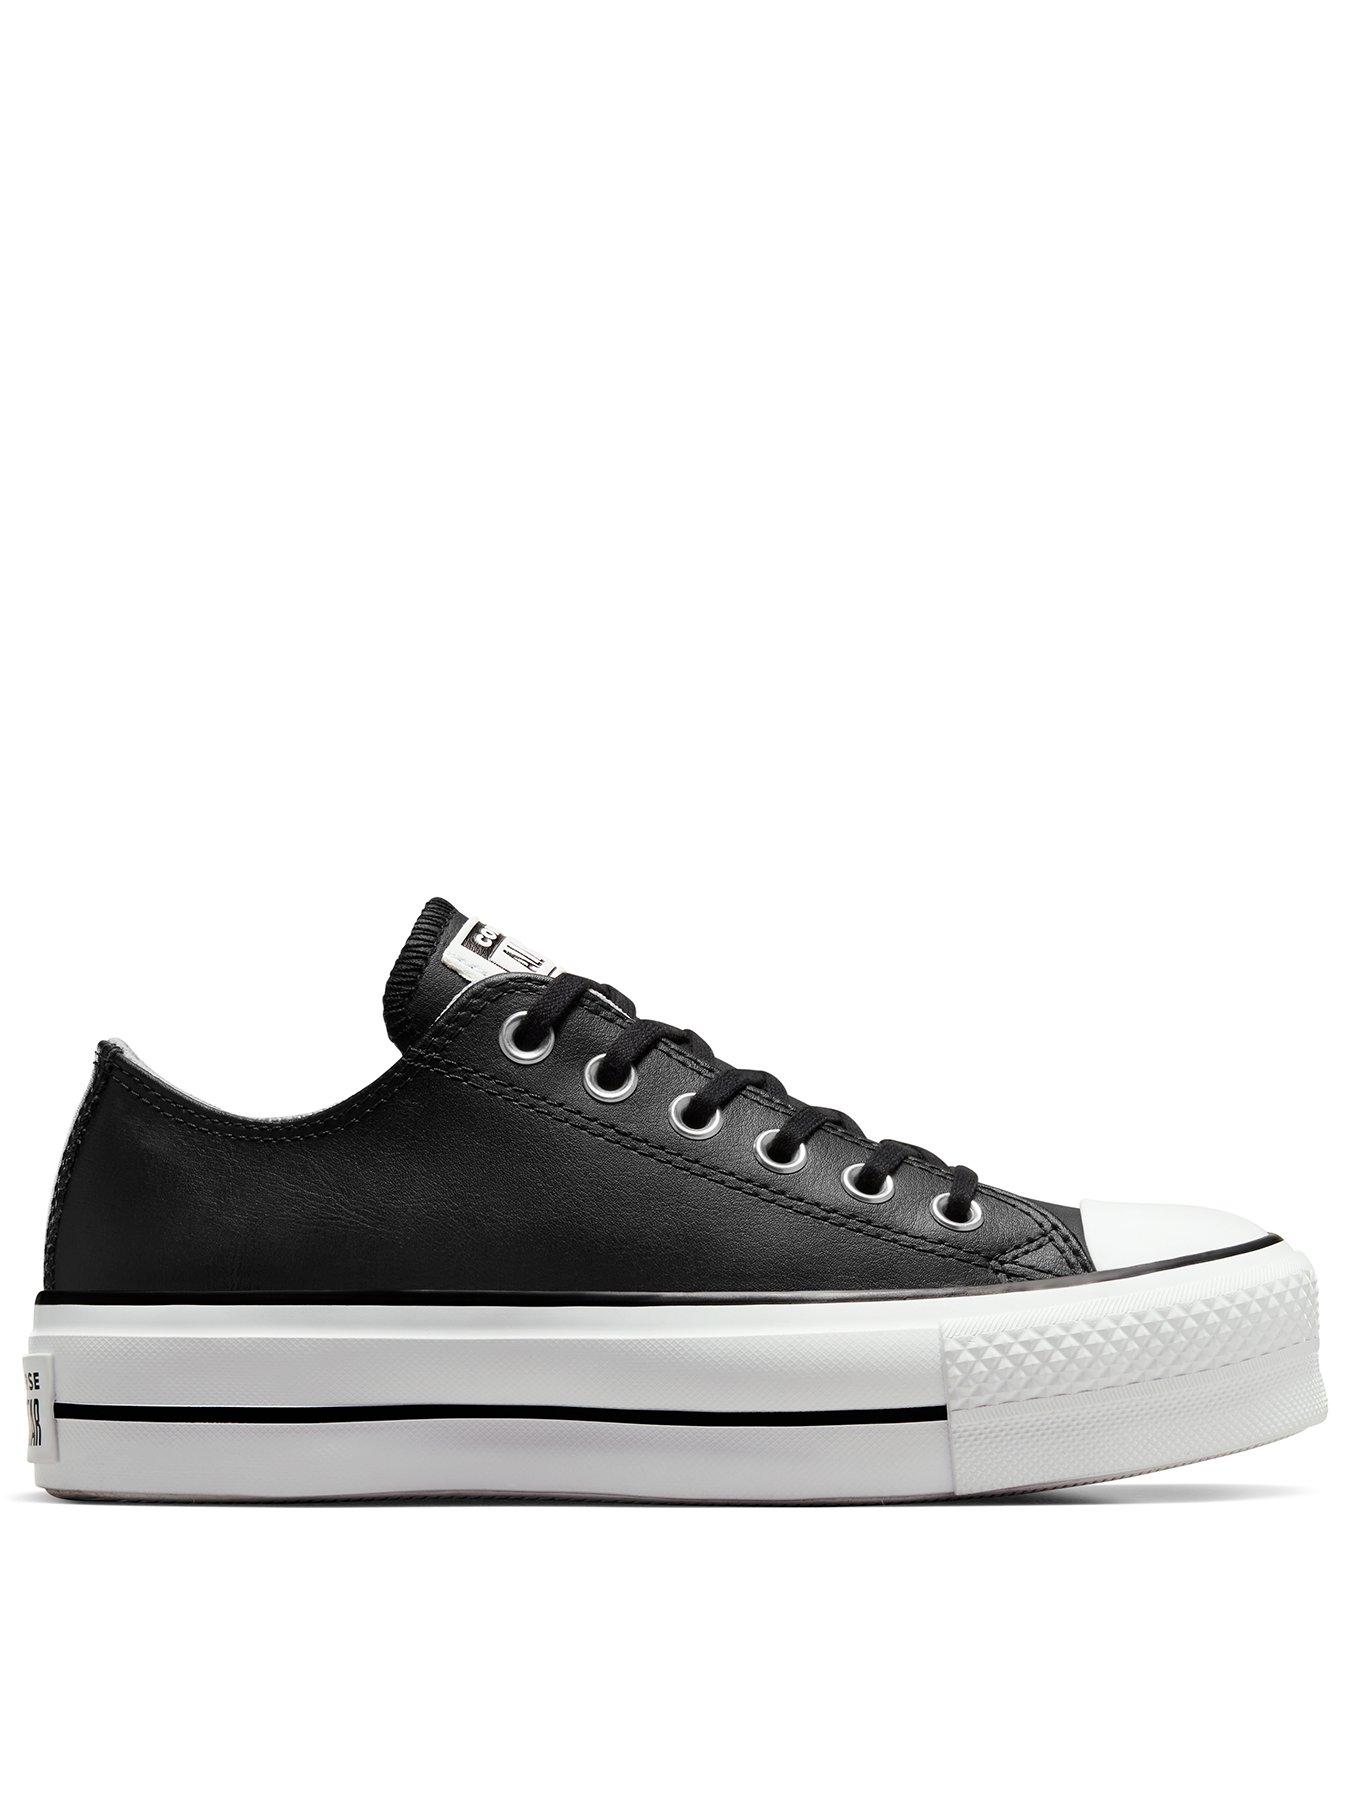 leather converse all stars uk